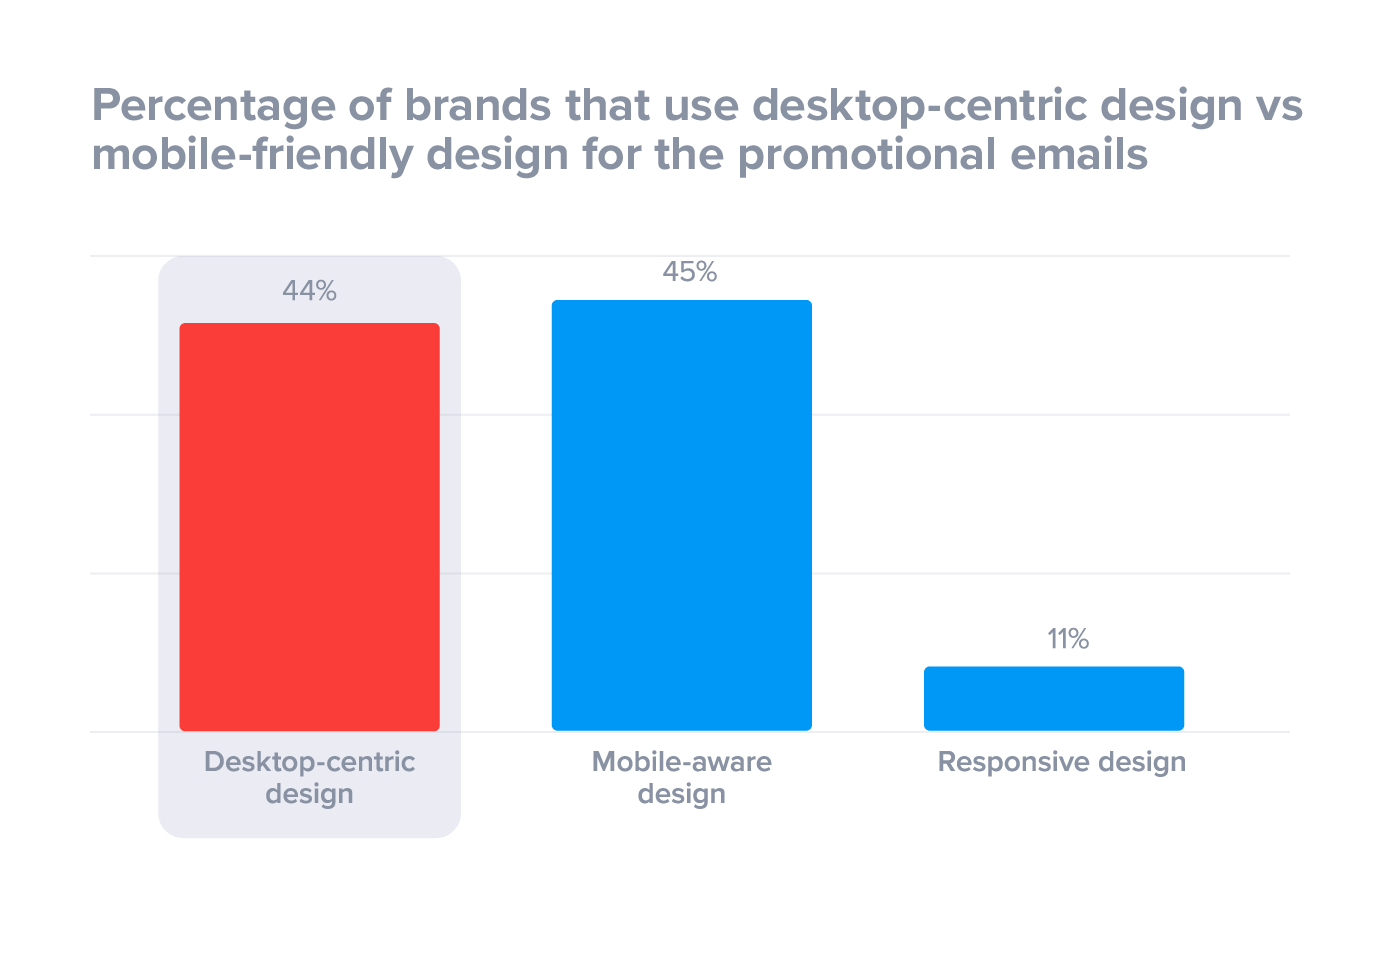 Percentage of mobile friendly emails